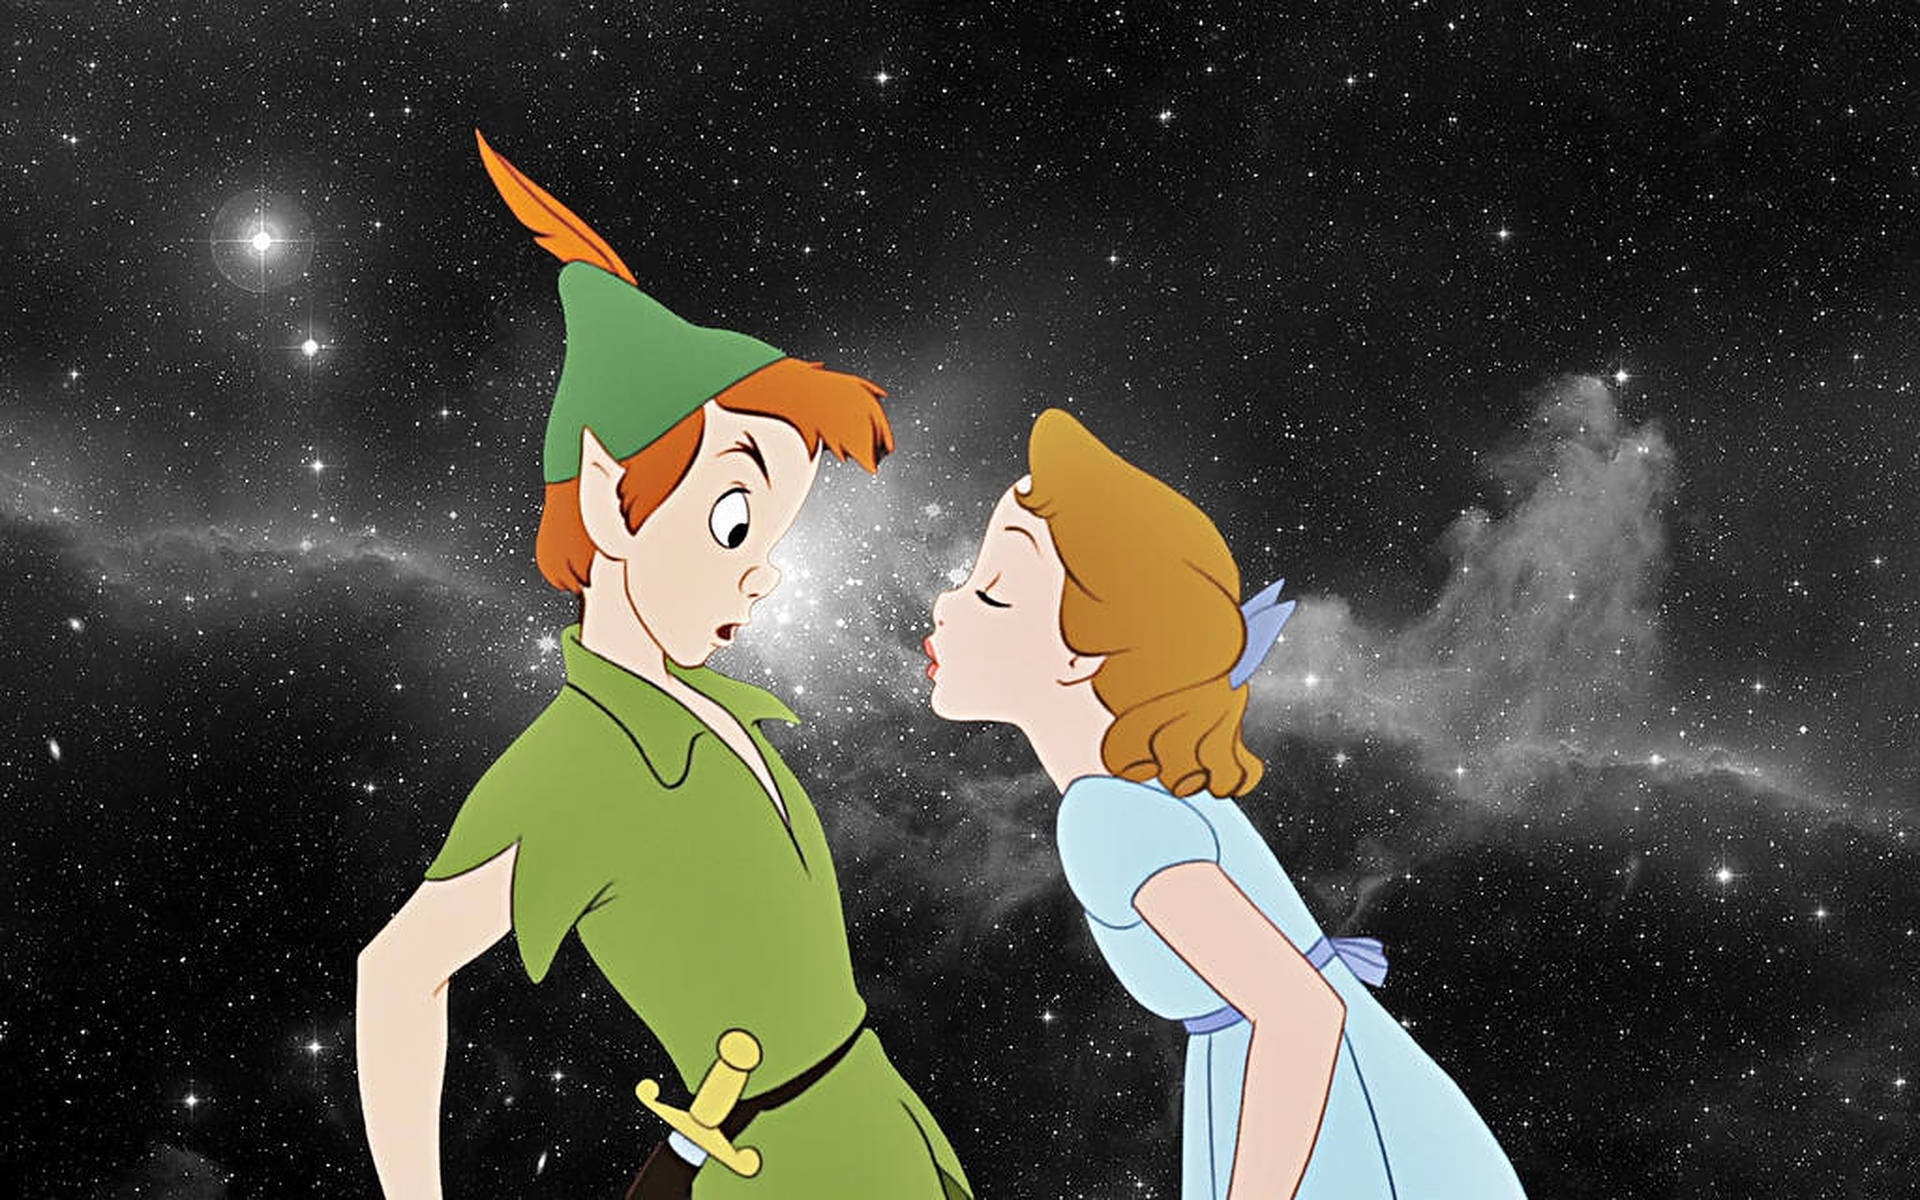 Peterpan Och Wendy. (note: The Translation Is The Same In A Computer Or Mobile Wallpaper Context.) Wallpaper